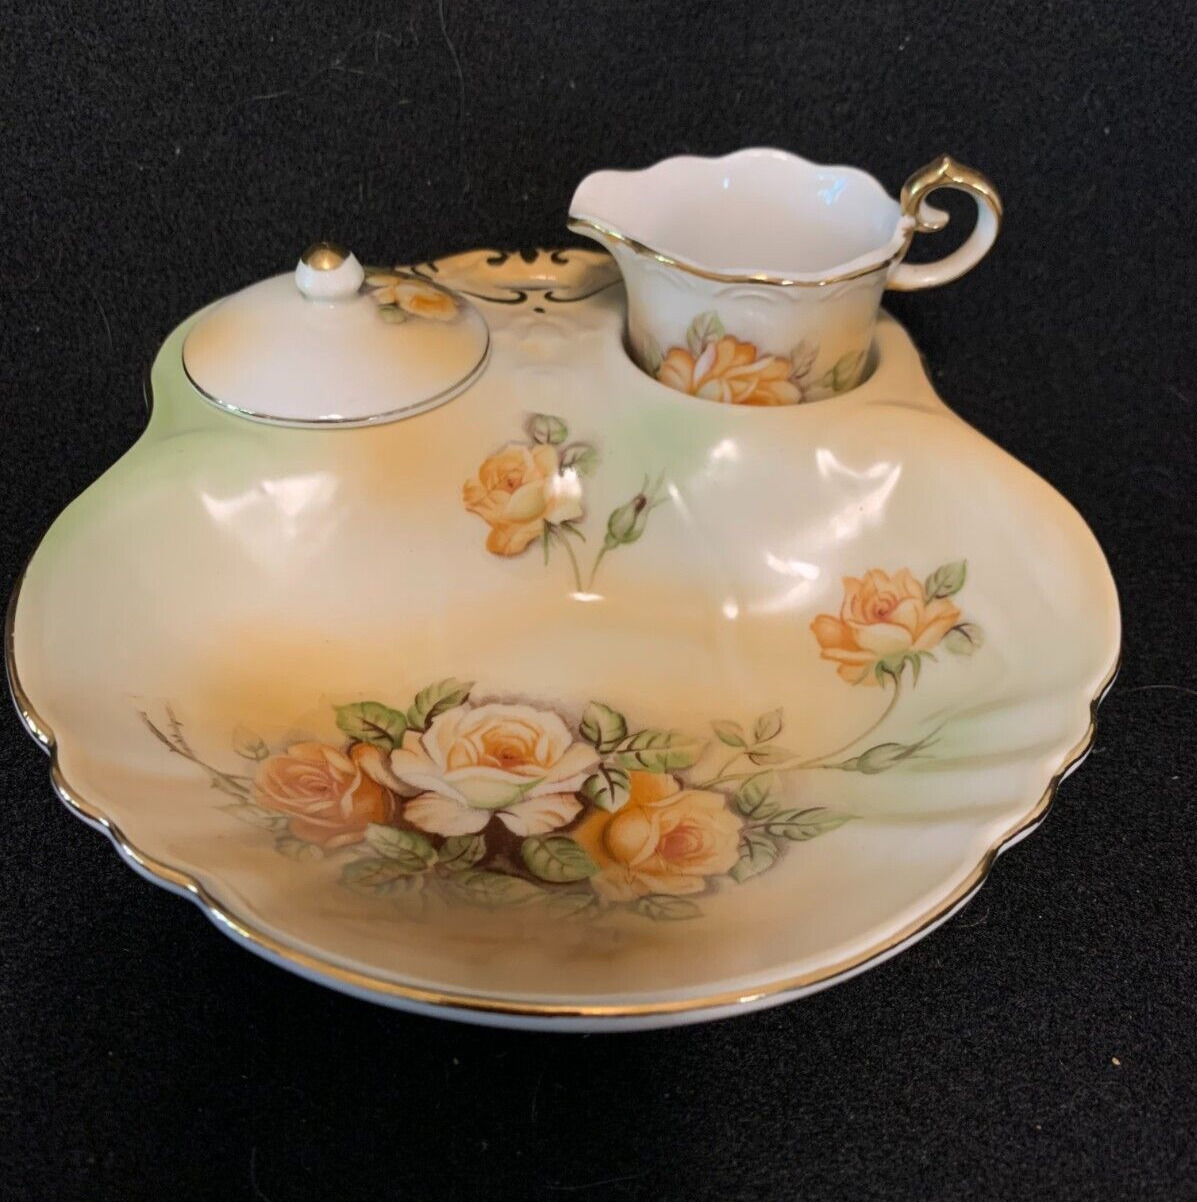 Elegant Serving Berry Bowl with Creamer and Lid for the Sugar Bowl